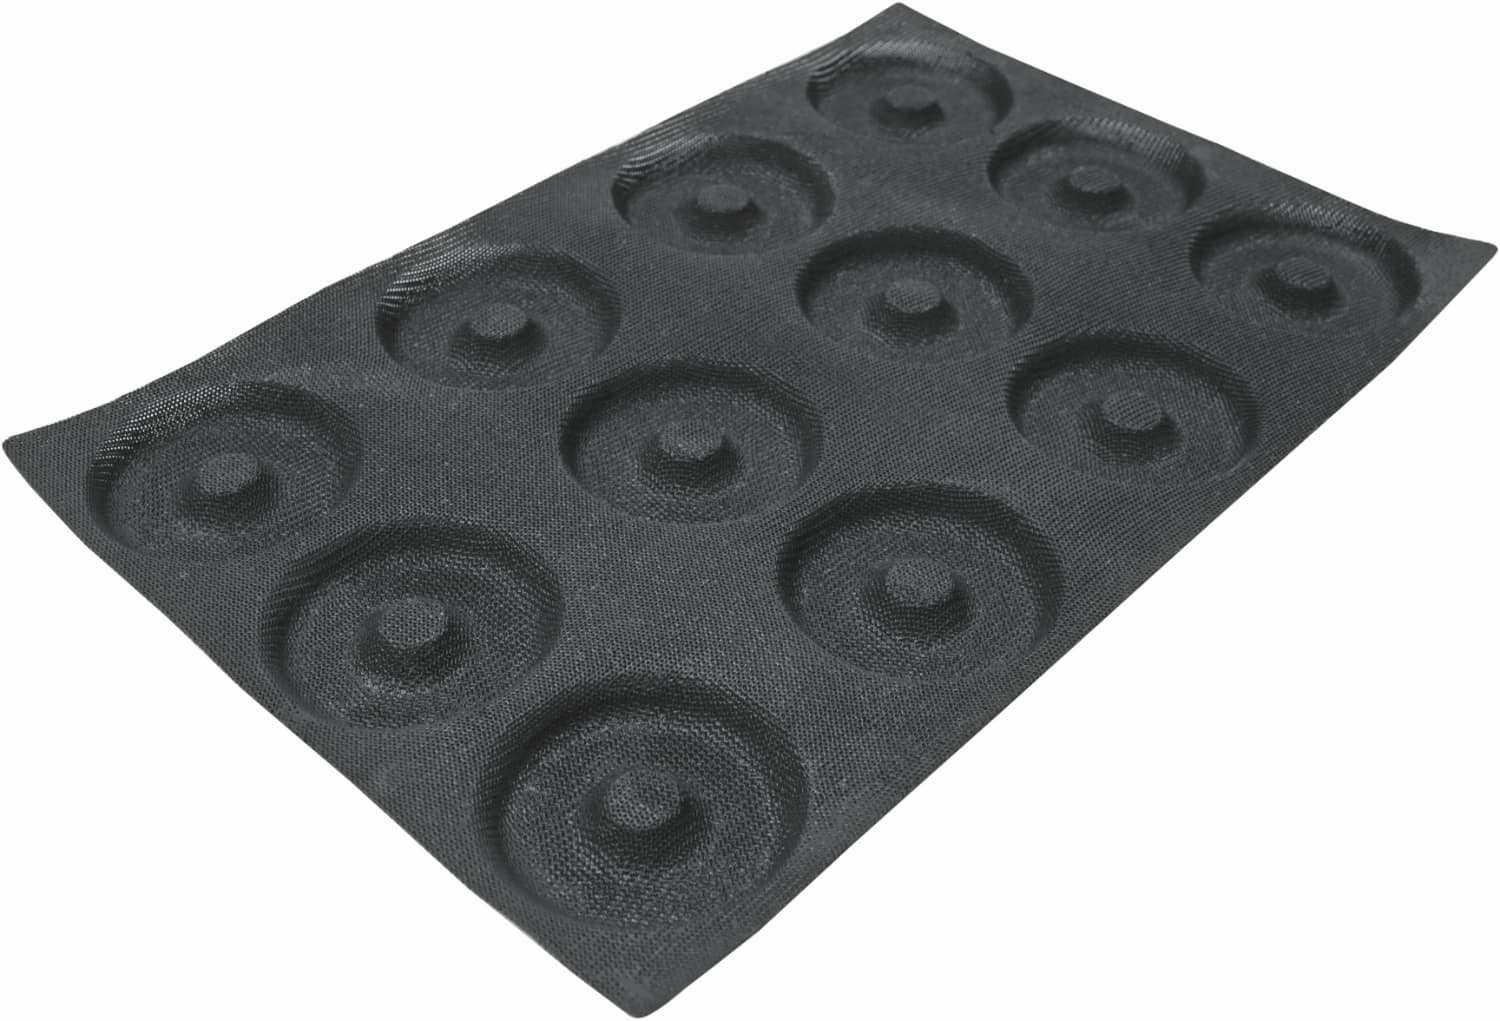 Baking mould AIR "Bagel" non-stick coated 115805